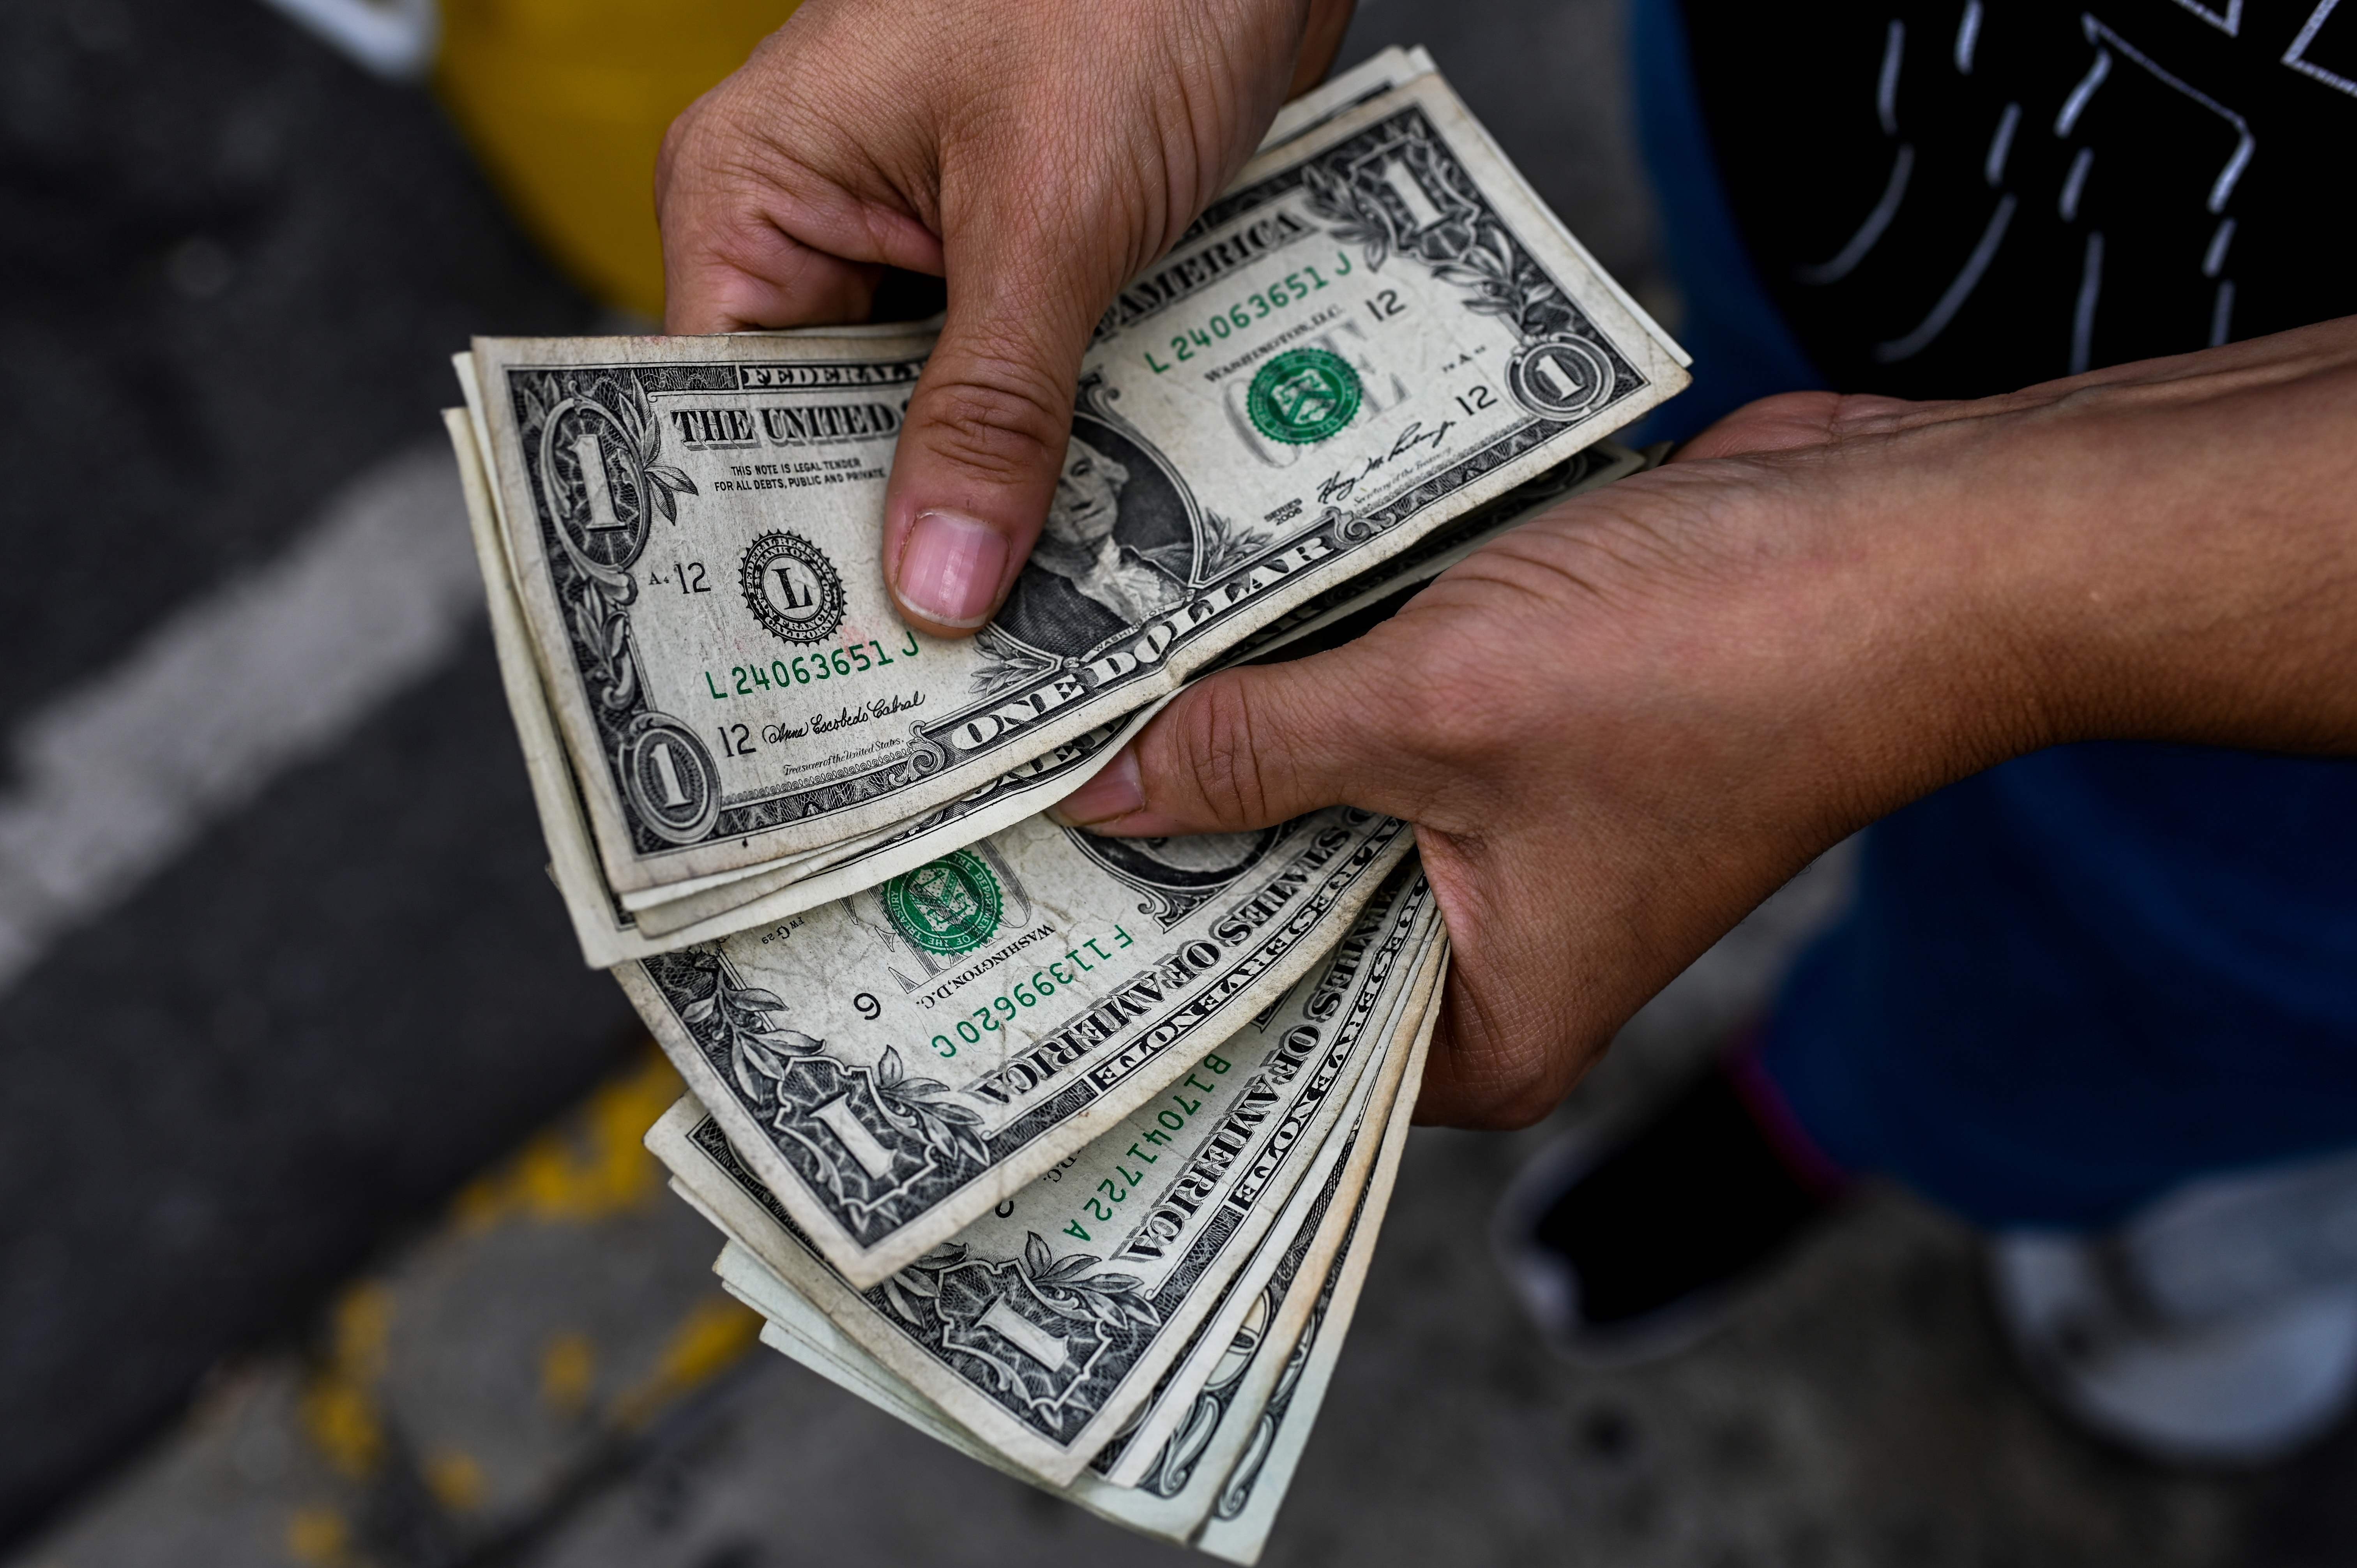 A street hawker counts dollar bills in Caracas, Venezuela, on November 19. In Venezuela, the US dollar is used for most transactions after years of hyperinflation and devaluation of the bolívar. Photo: AFP